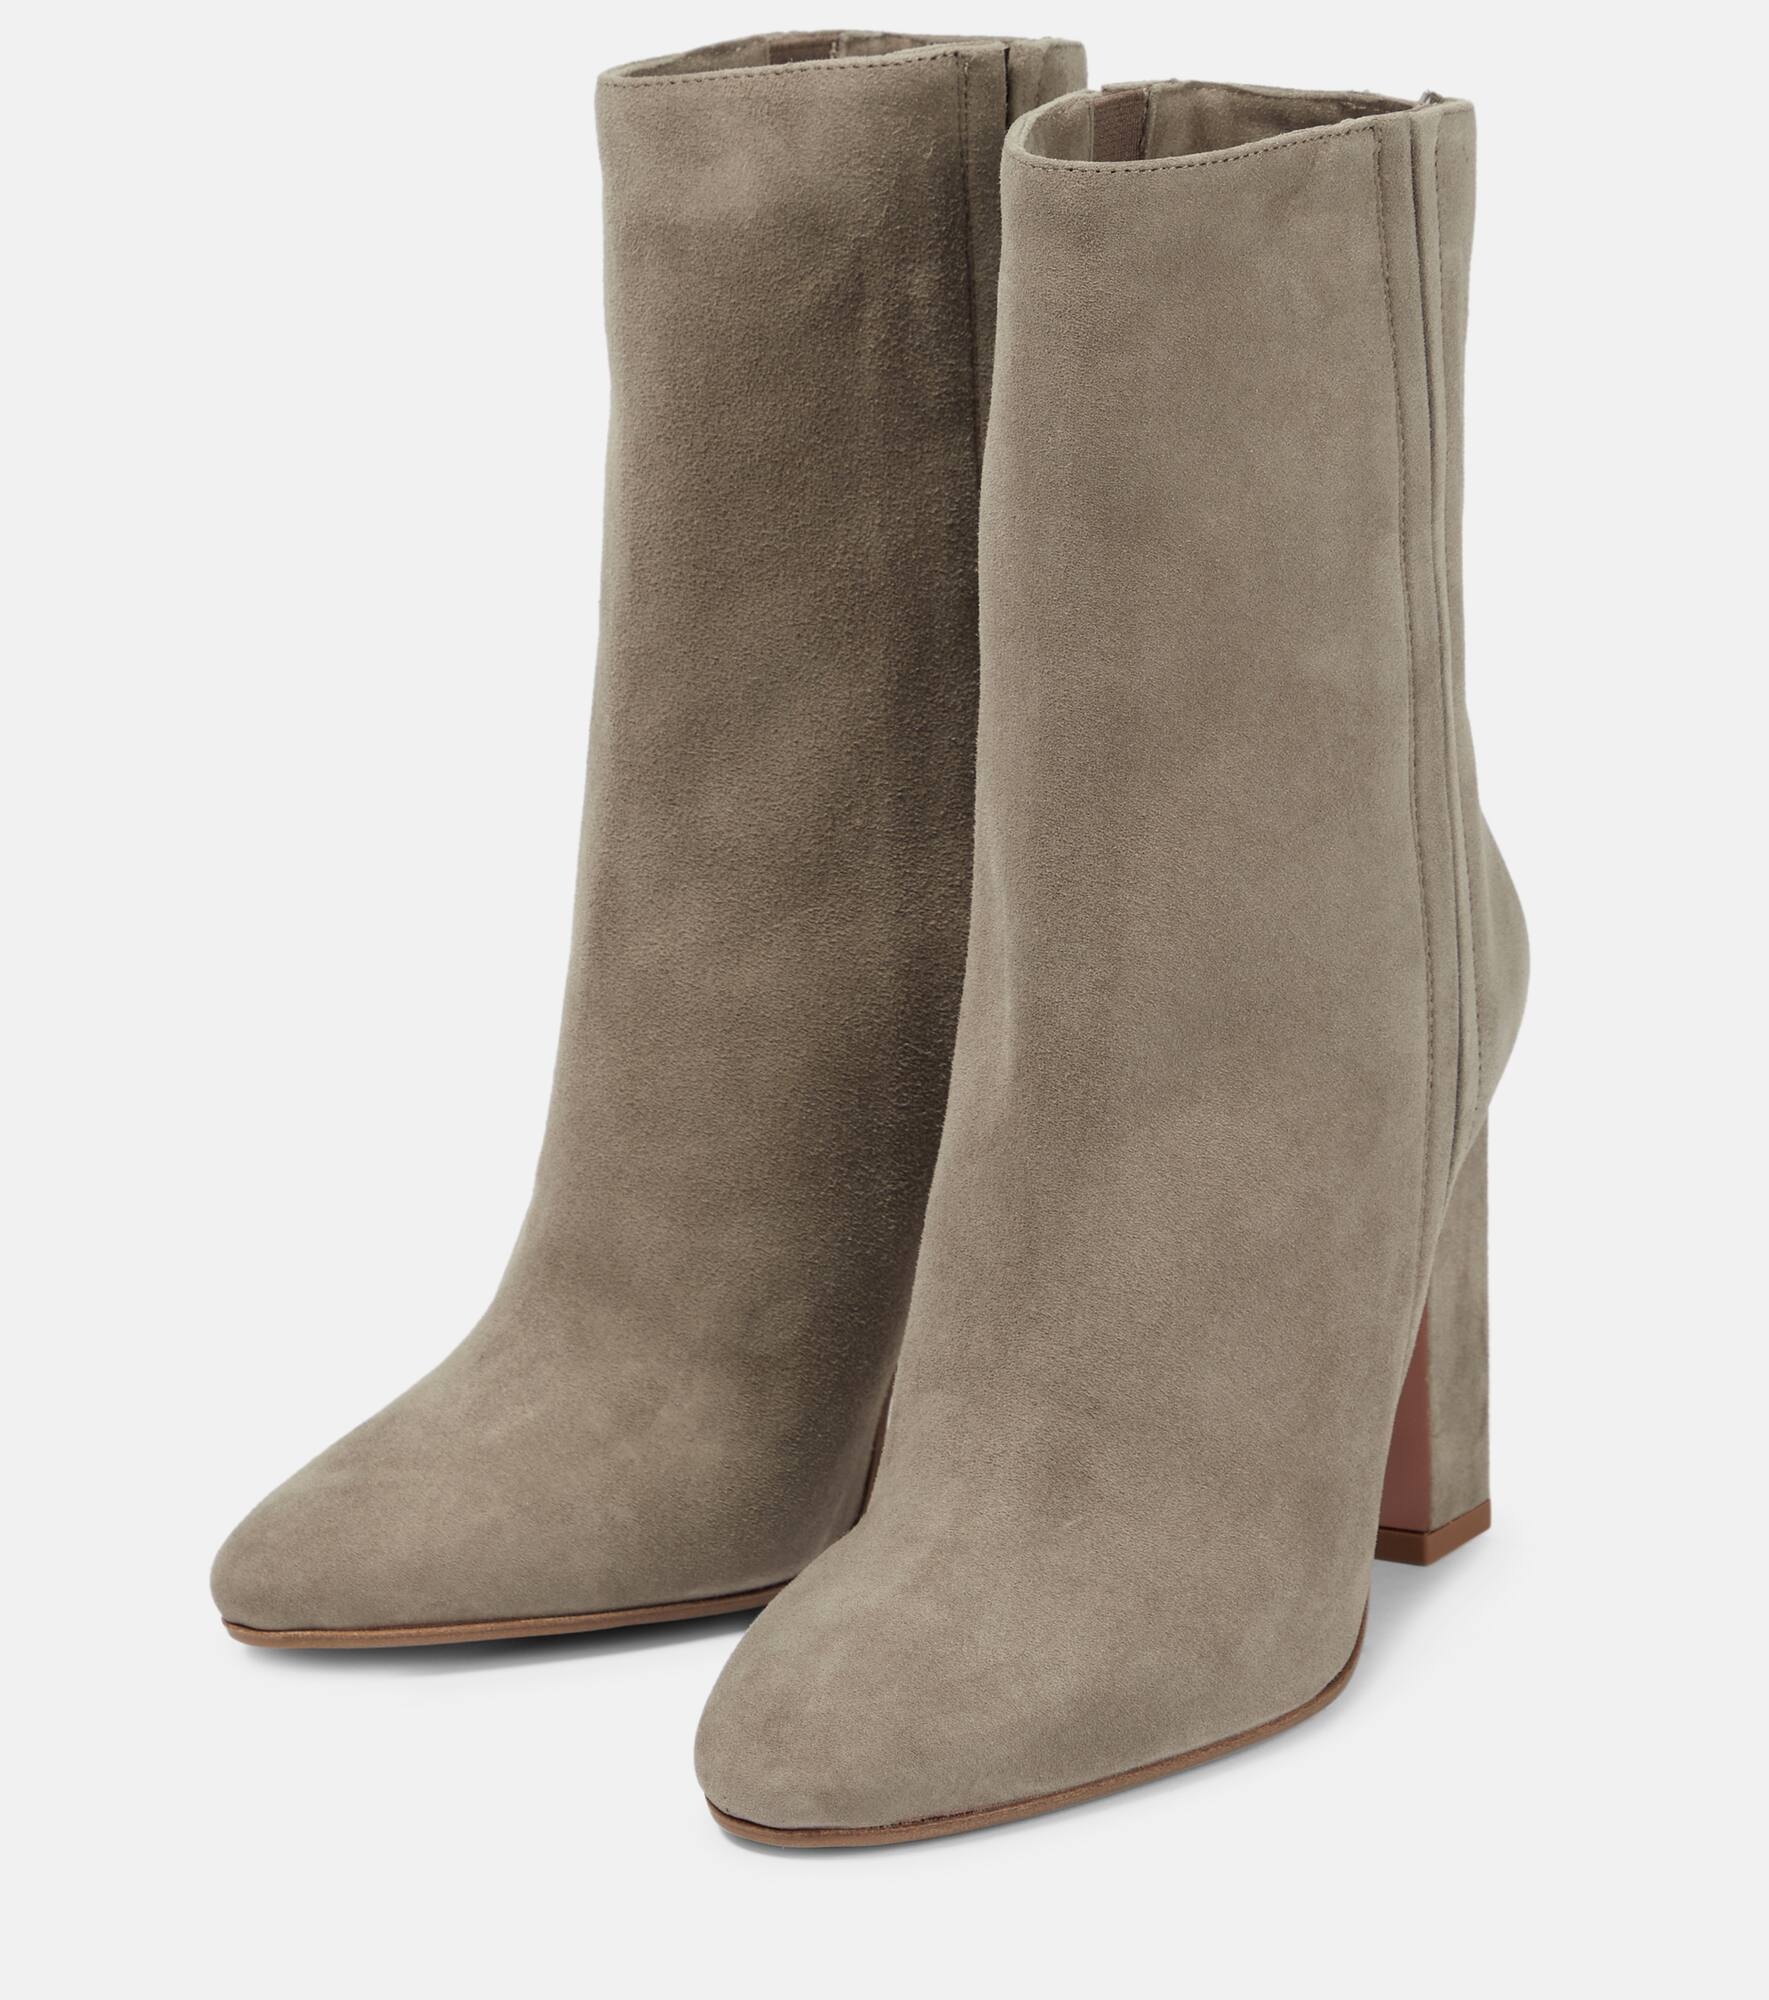 Suede ankle boots - 5